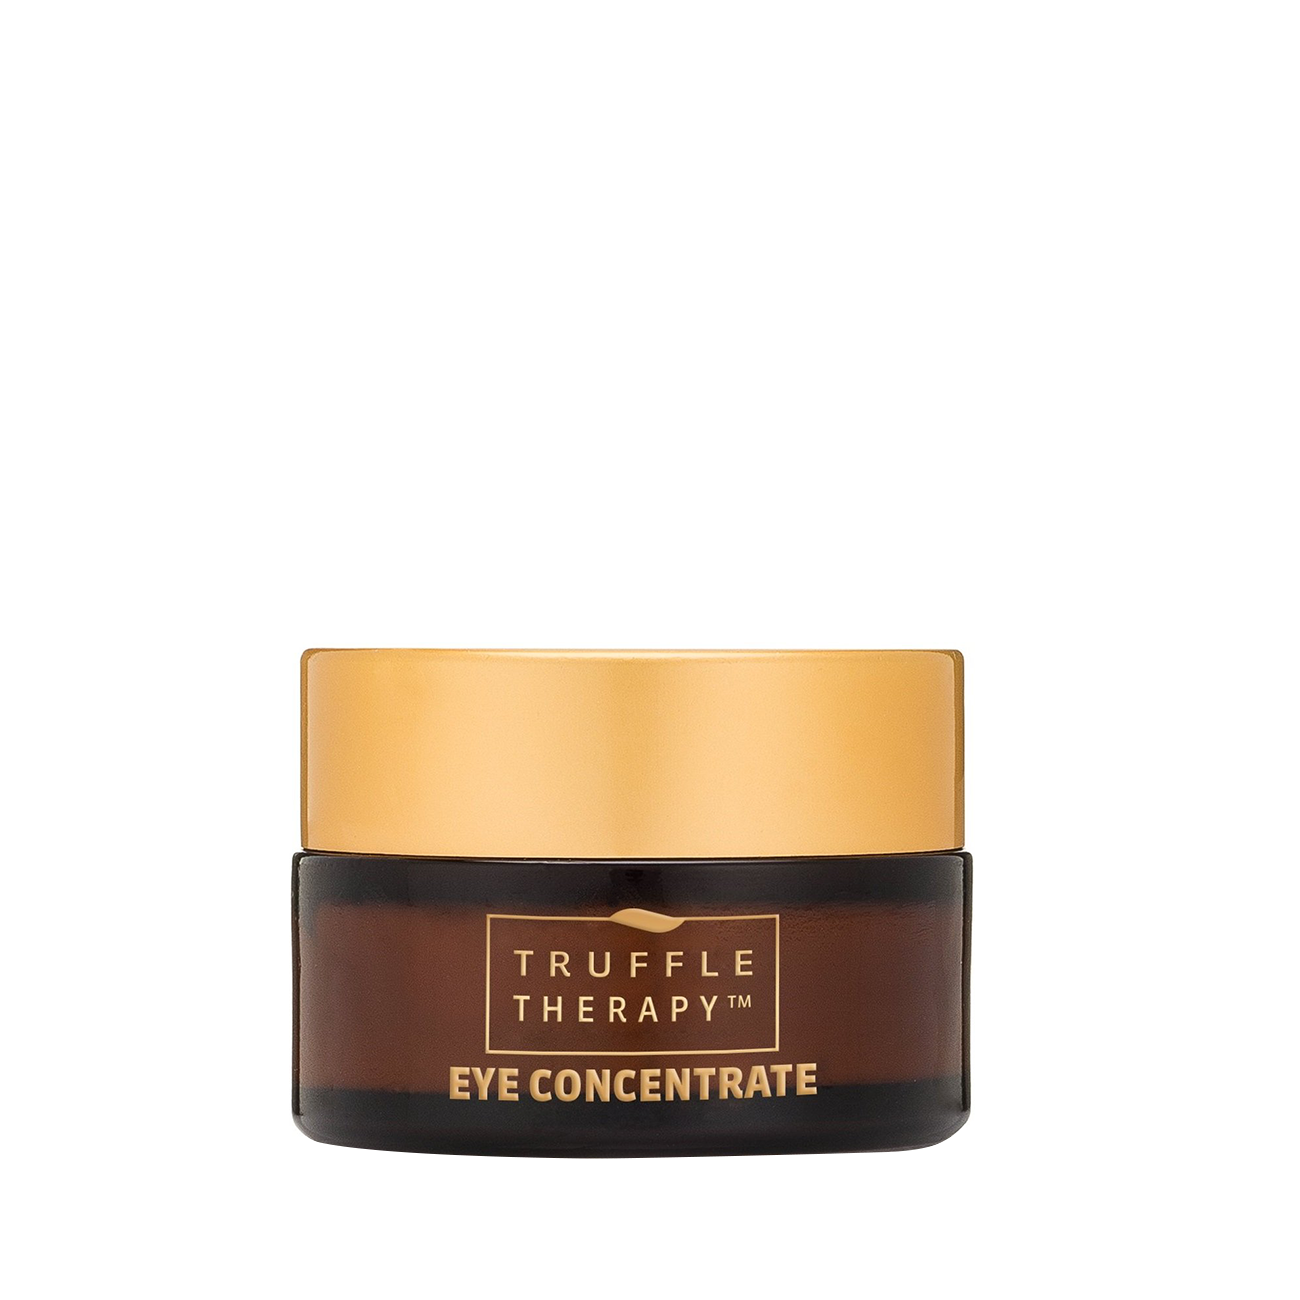 TRUFFLE THERAPY EYE CONCENTRATE 15 ml original Skin&Co Roma bestvalue